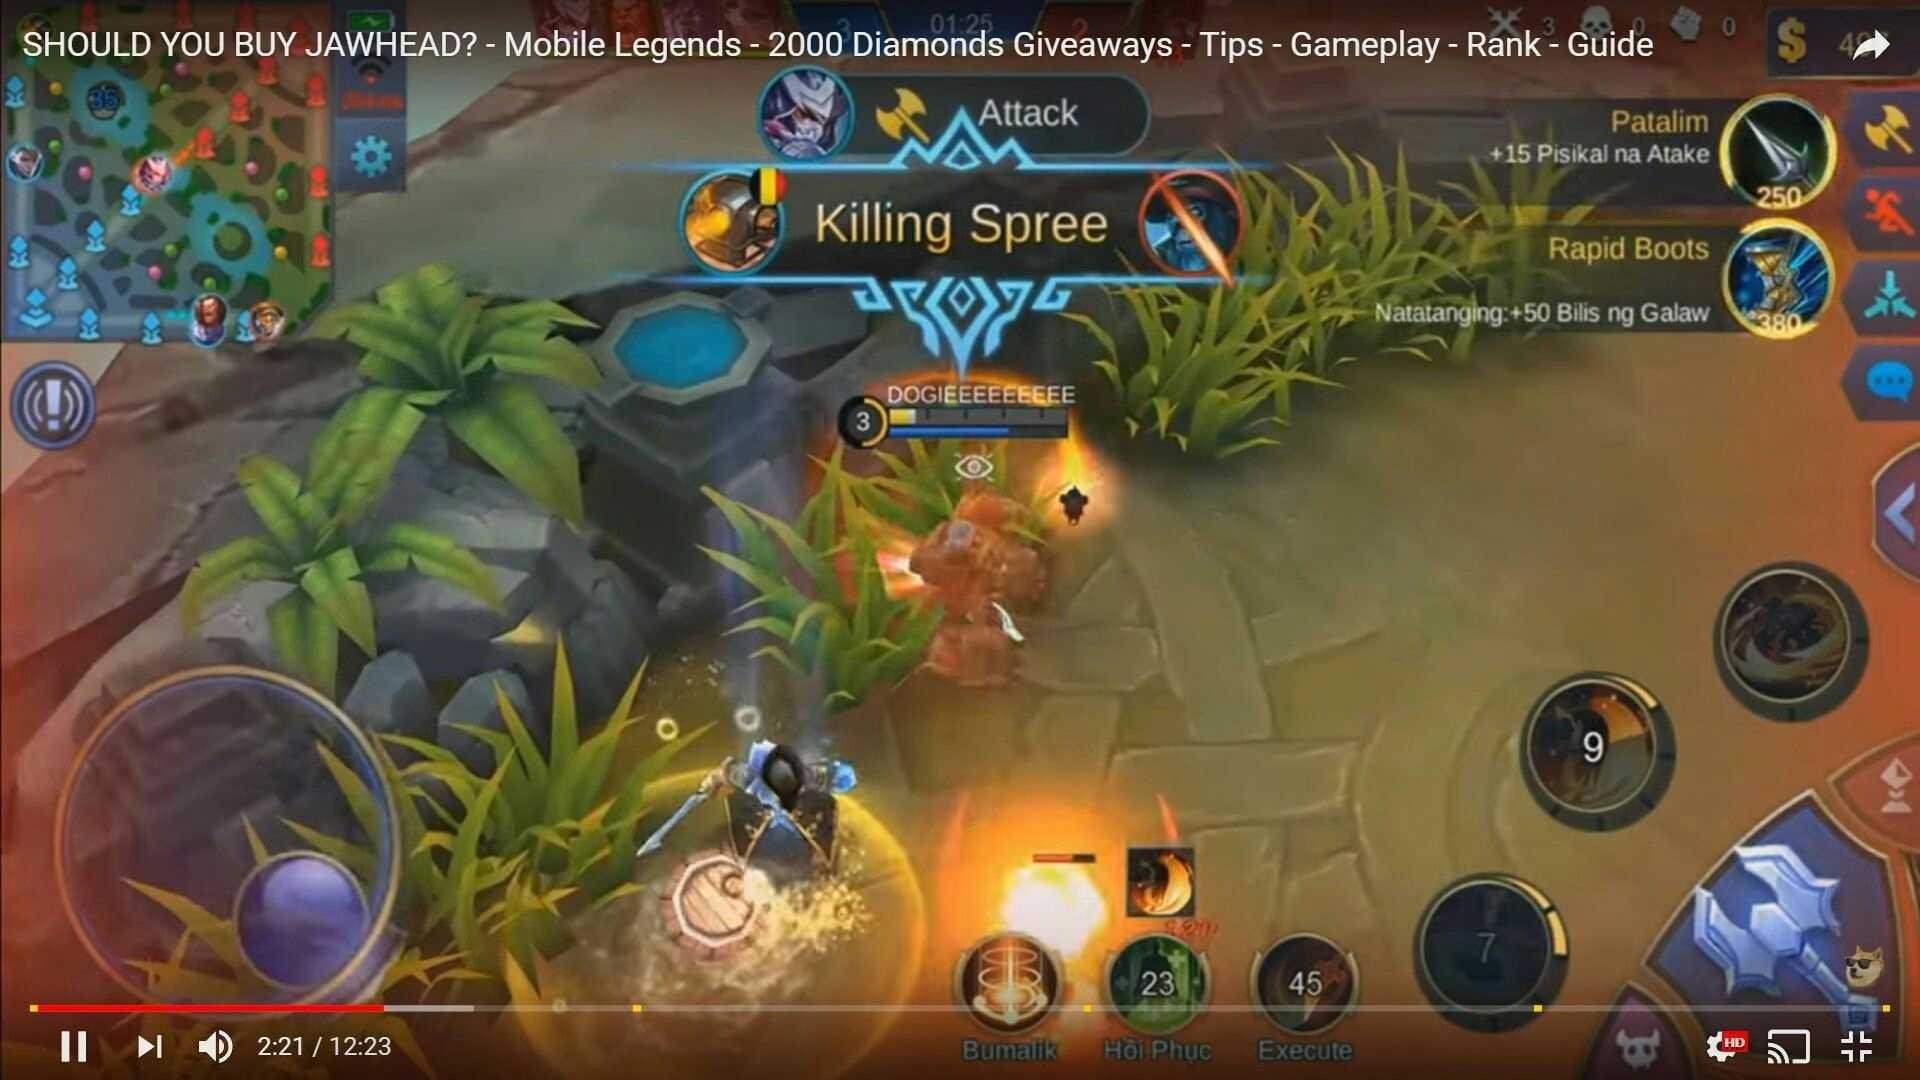 Advantages And Disadvantages Of Jawhead Hero In Mobile Legend Steemit